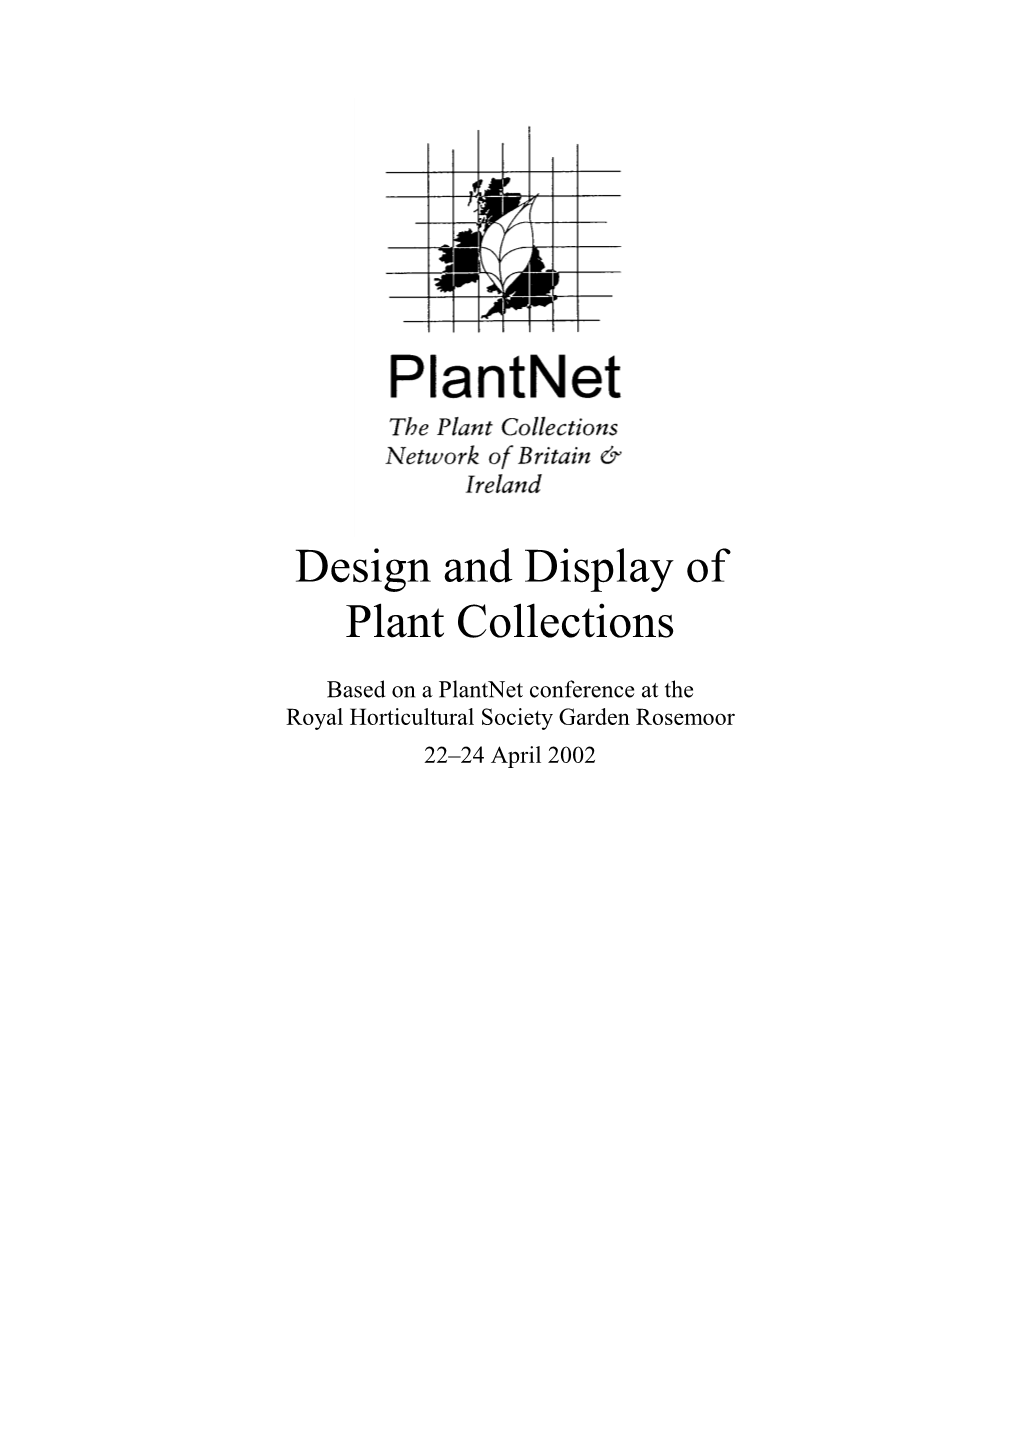 Design and Display of Plant Collections